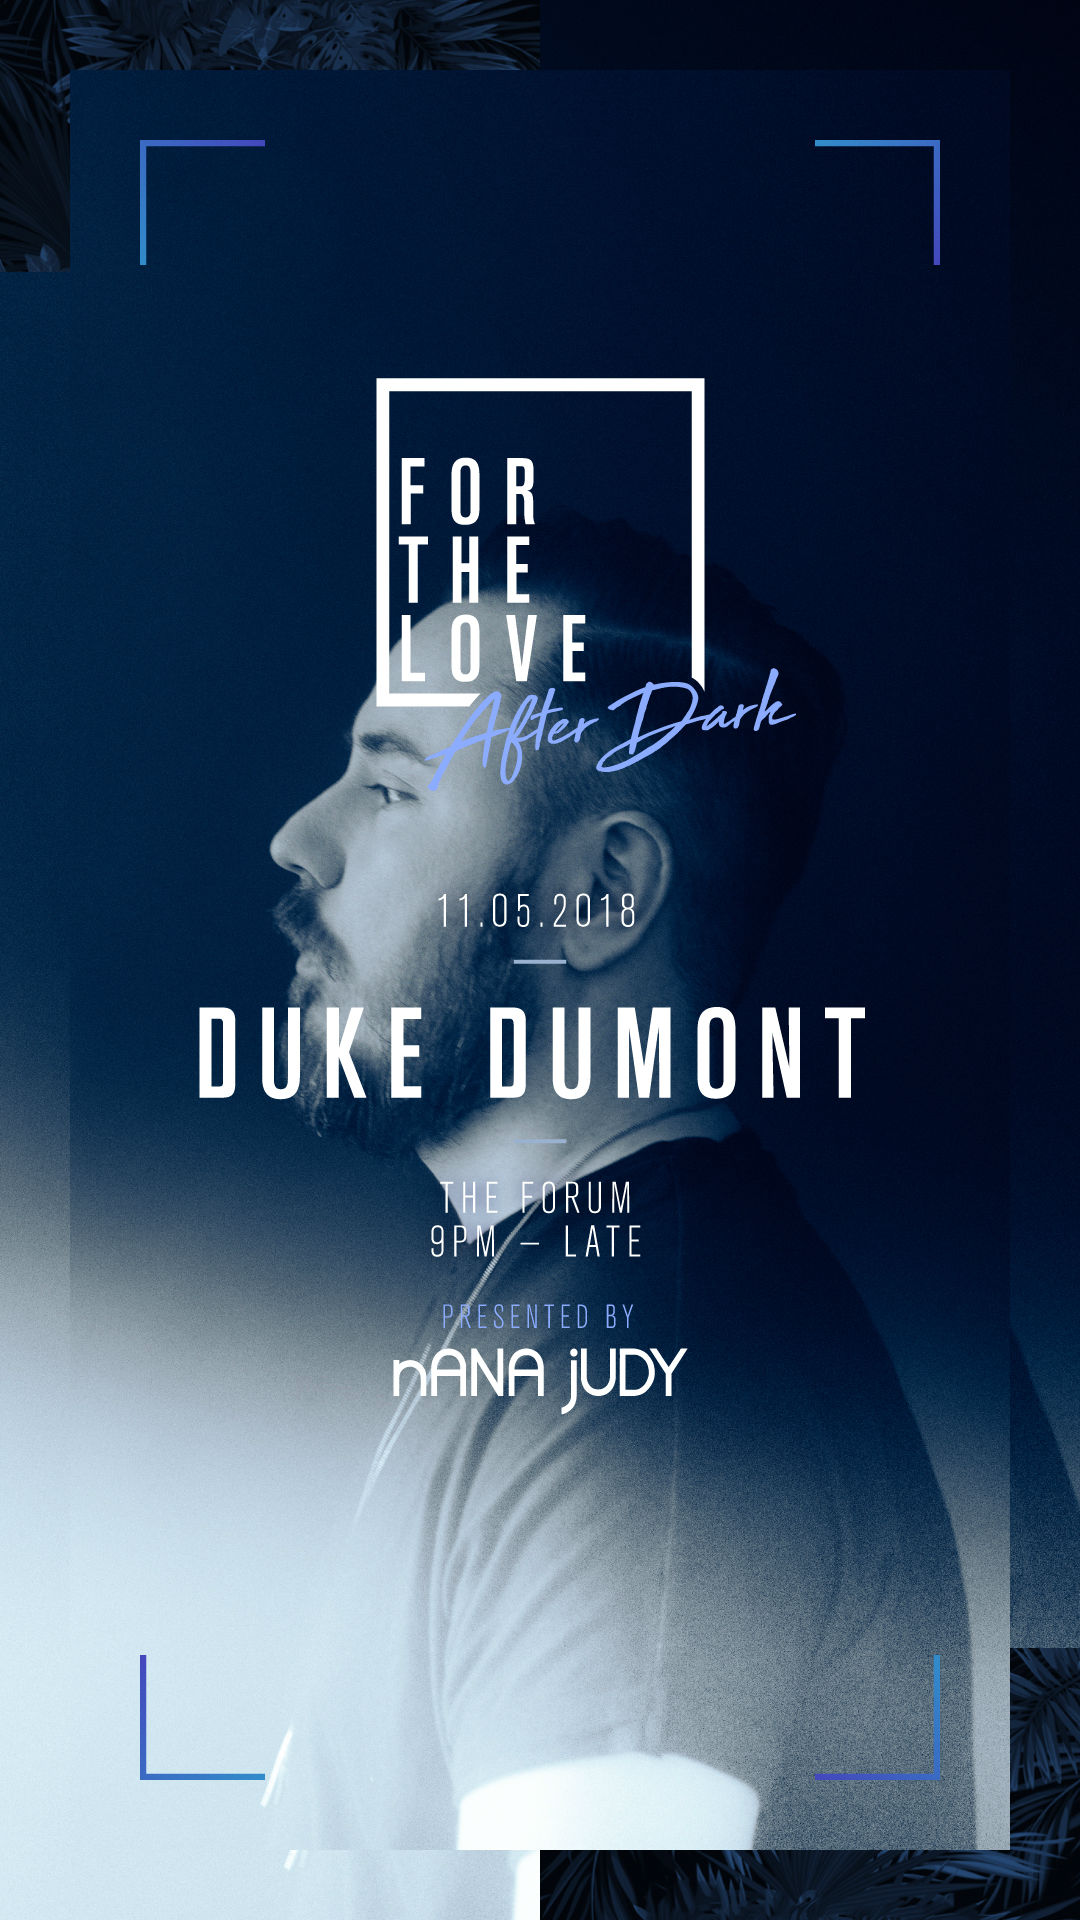 For The Love Is Bringing An Exclusive Duke Dumont Show To Melbourne